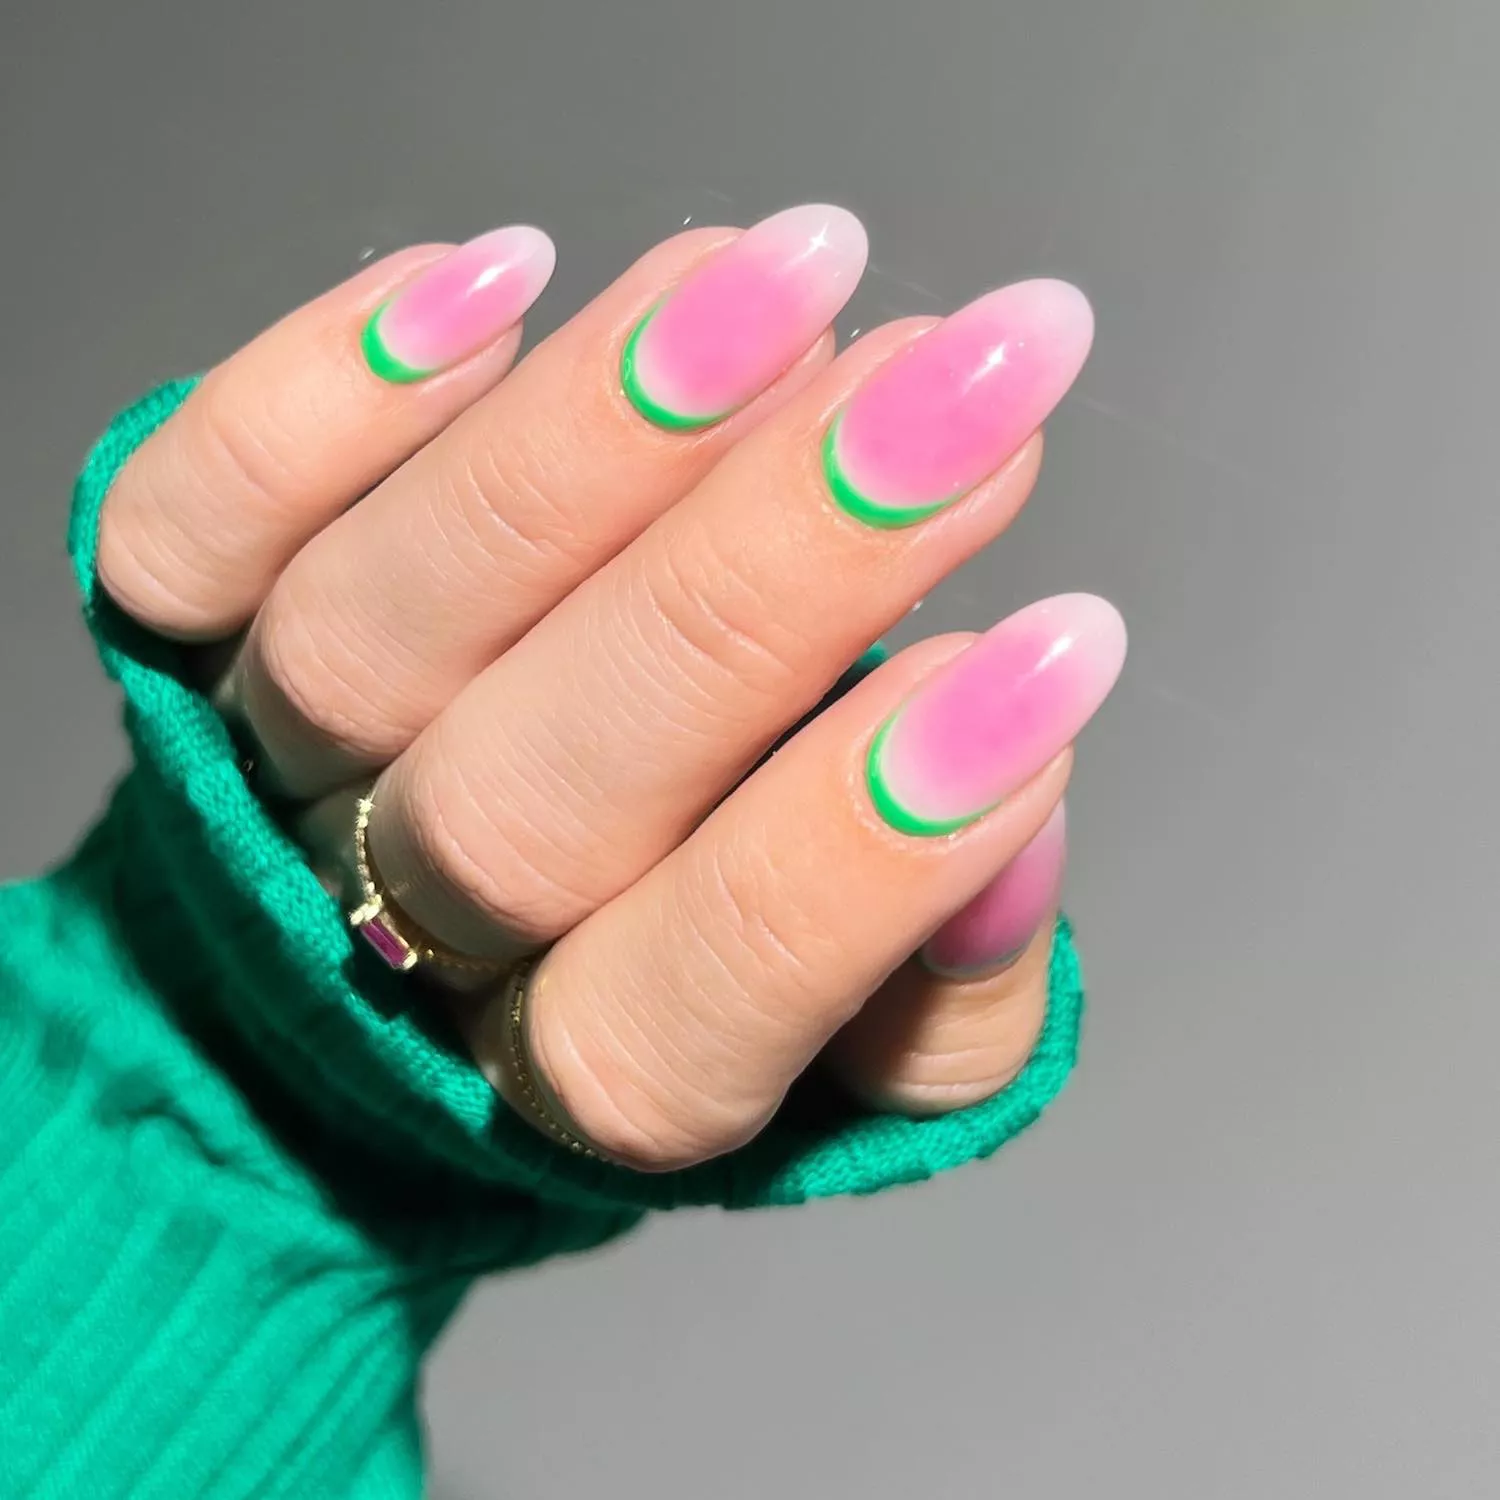 Manicure with muted watermelon pink blush base and neon green cuticle accents